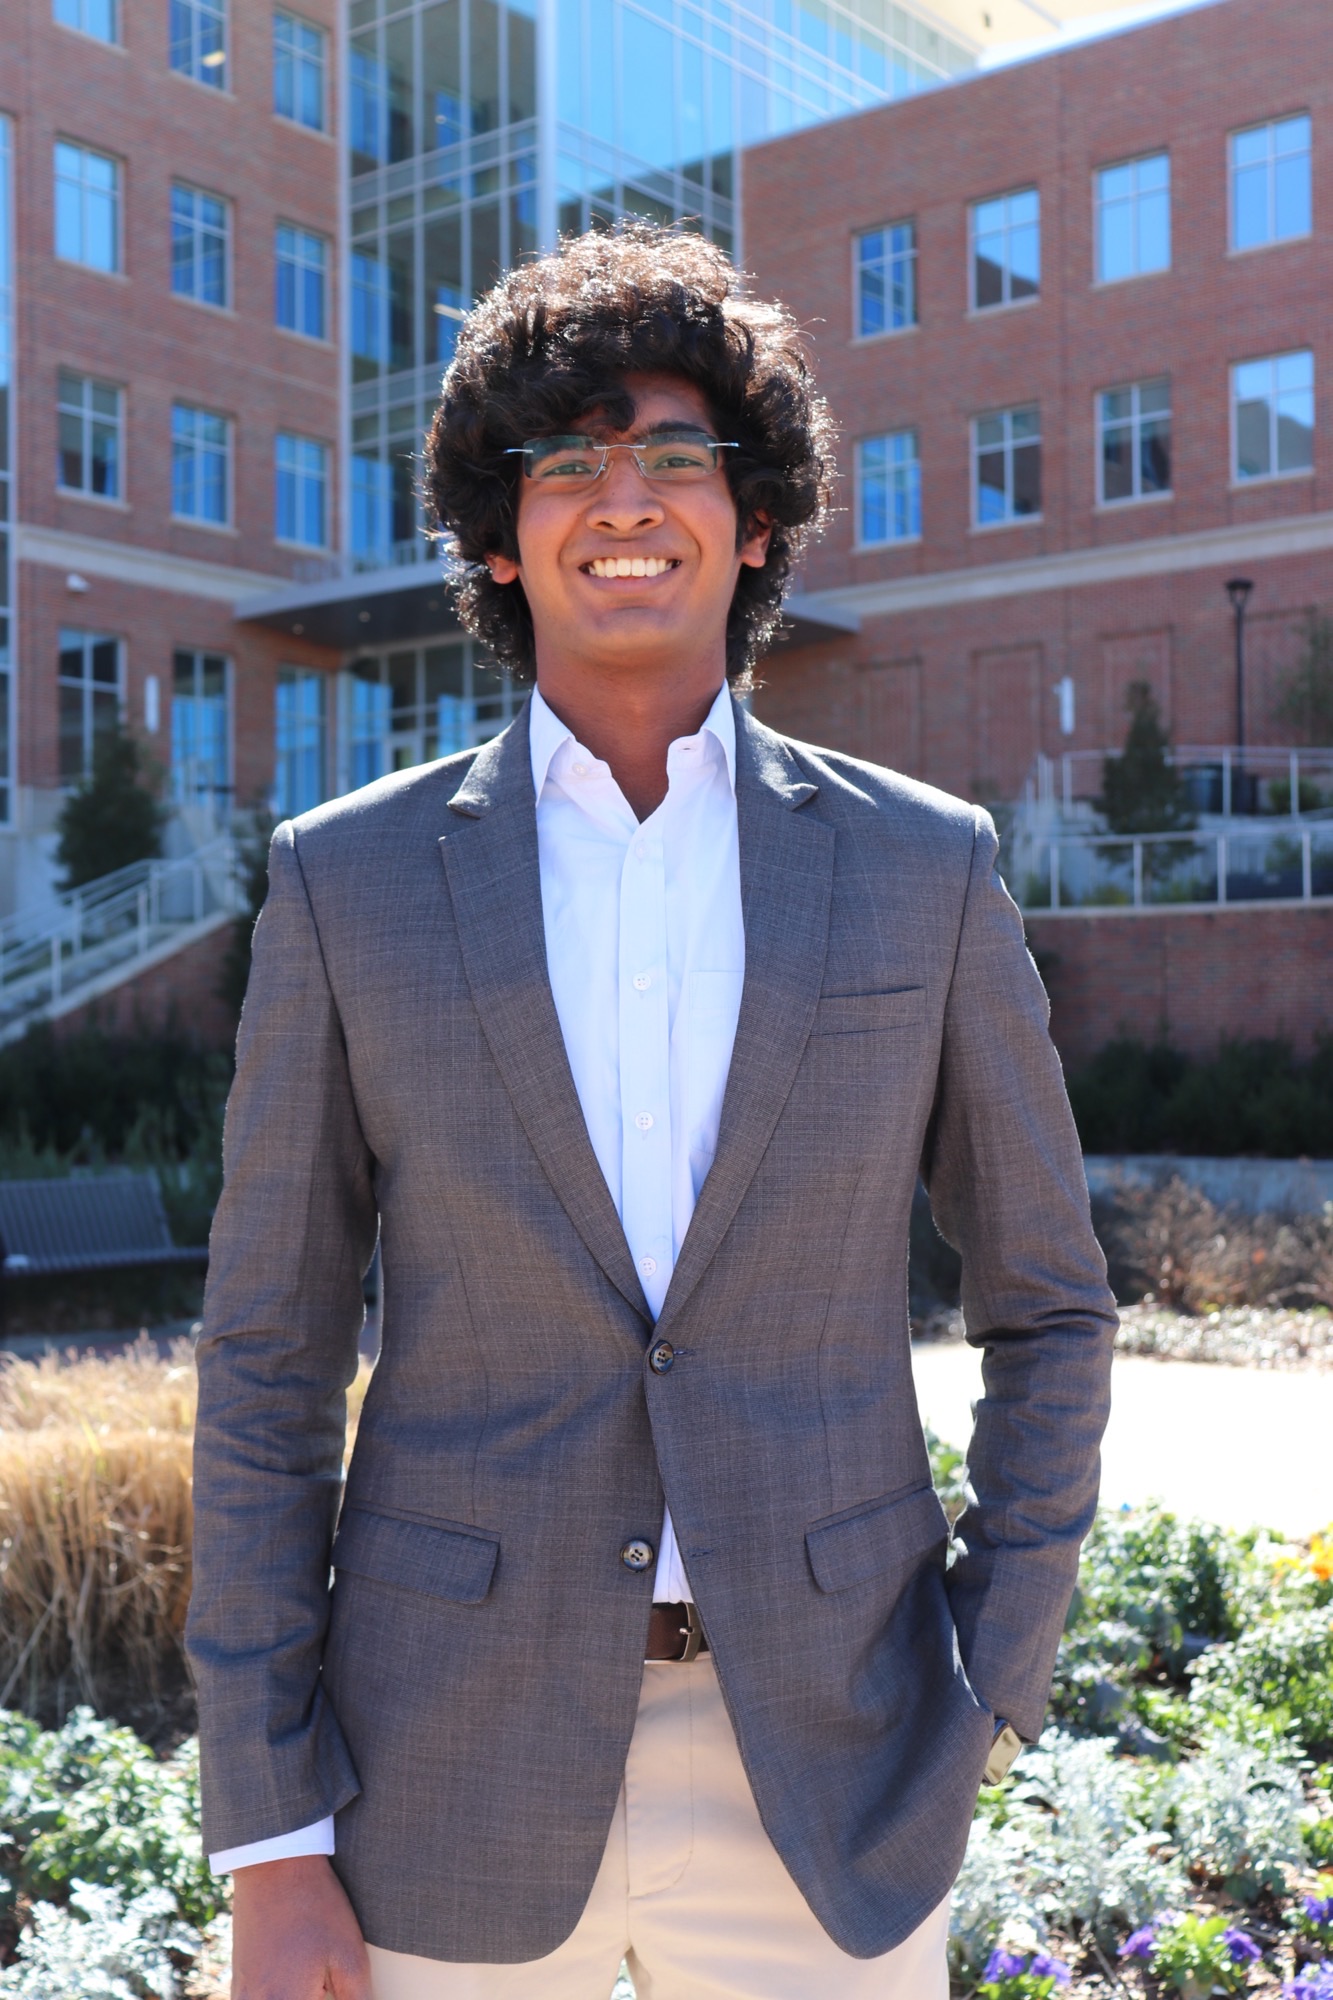 Indian male with brown curly hair, with glasses, smiling and wearing a gray suit coat over a white shirt with khaki pants standing outside with a building behind him.